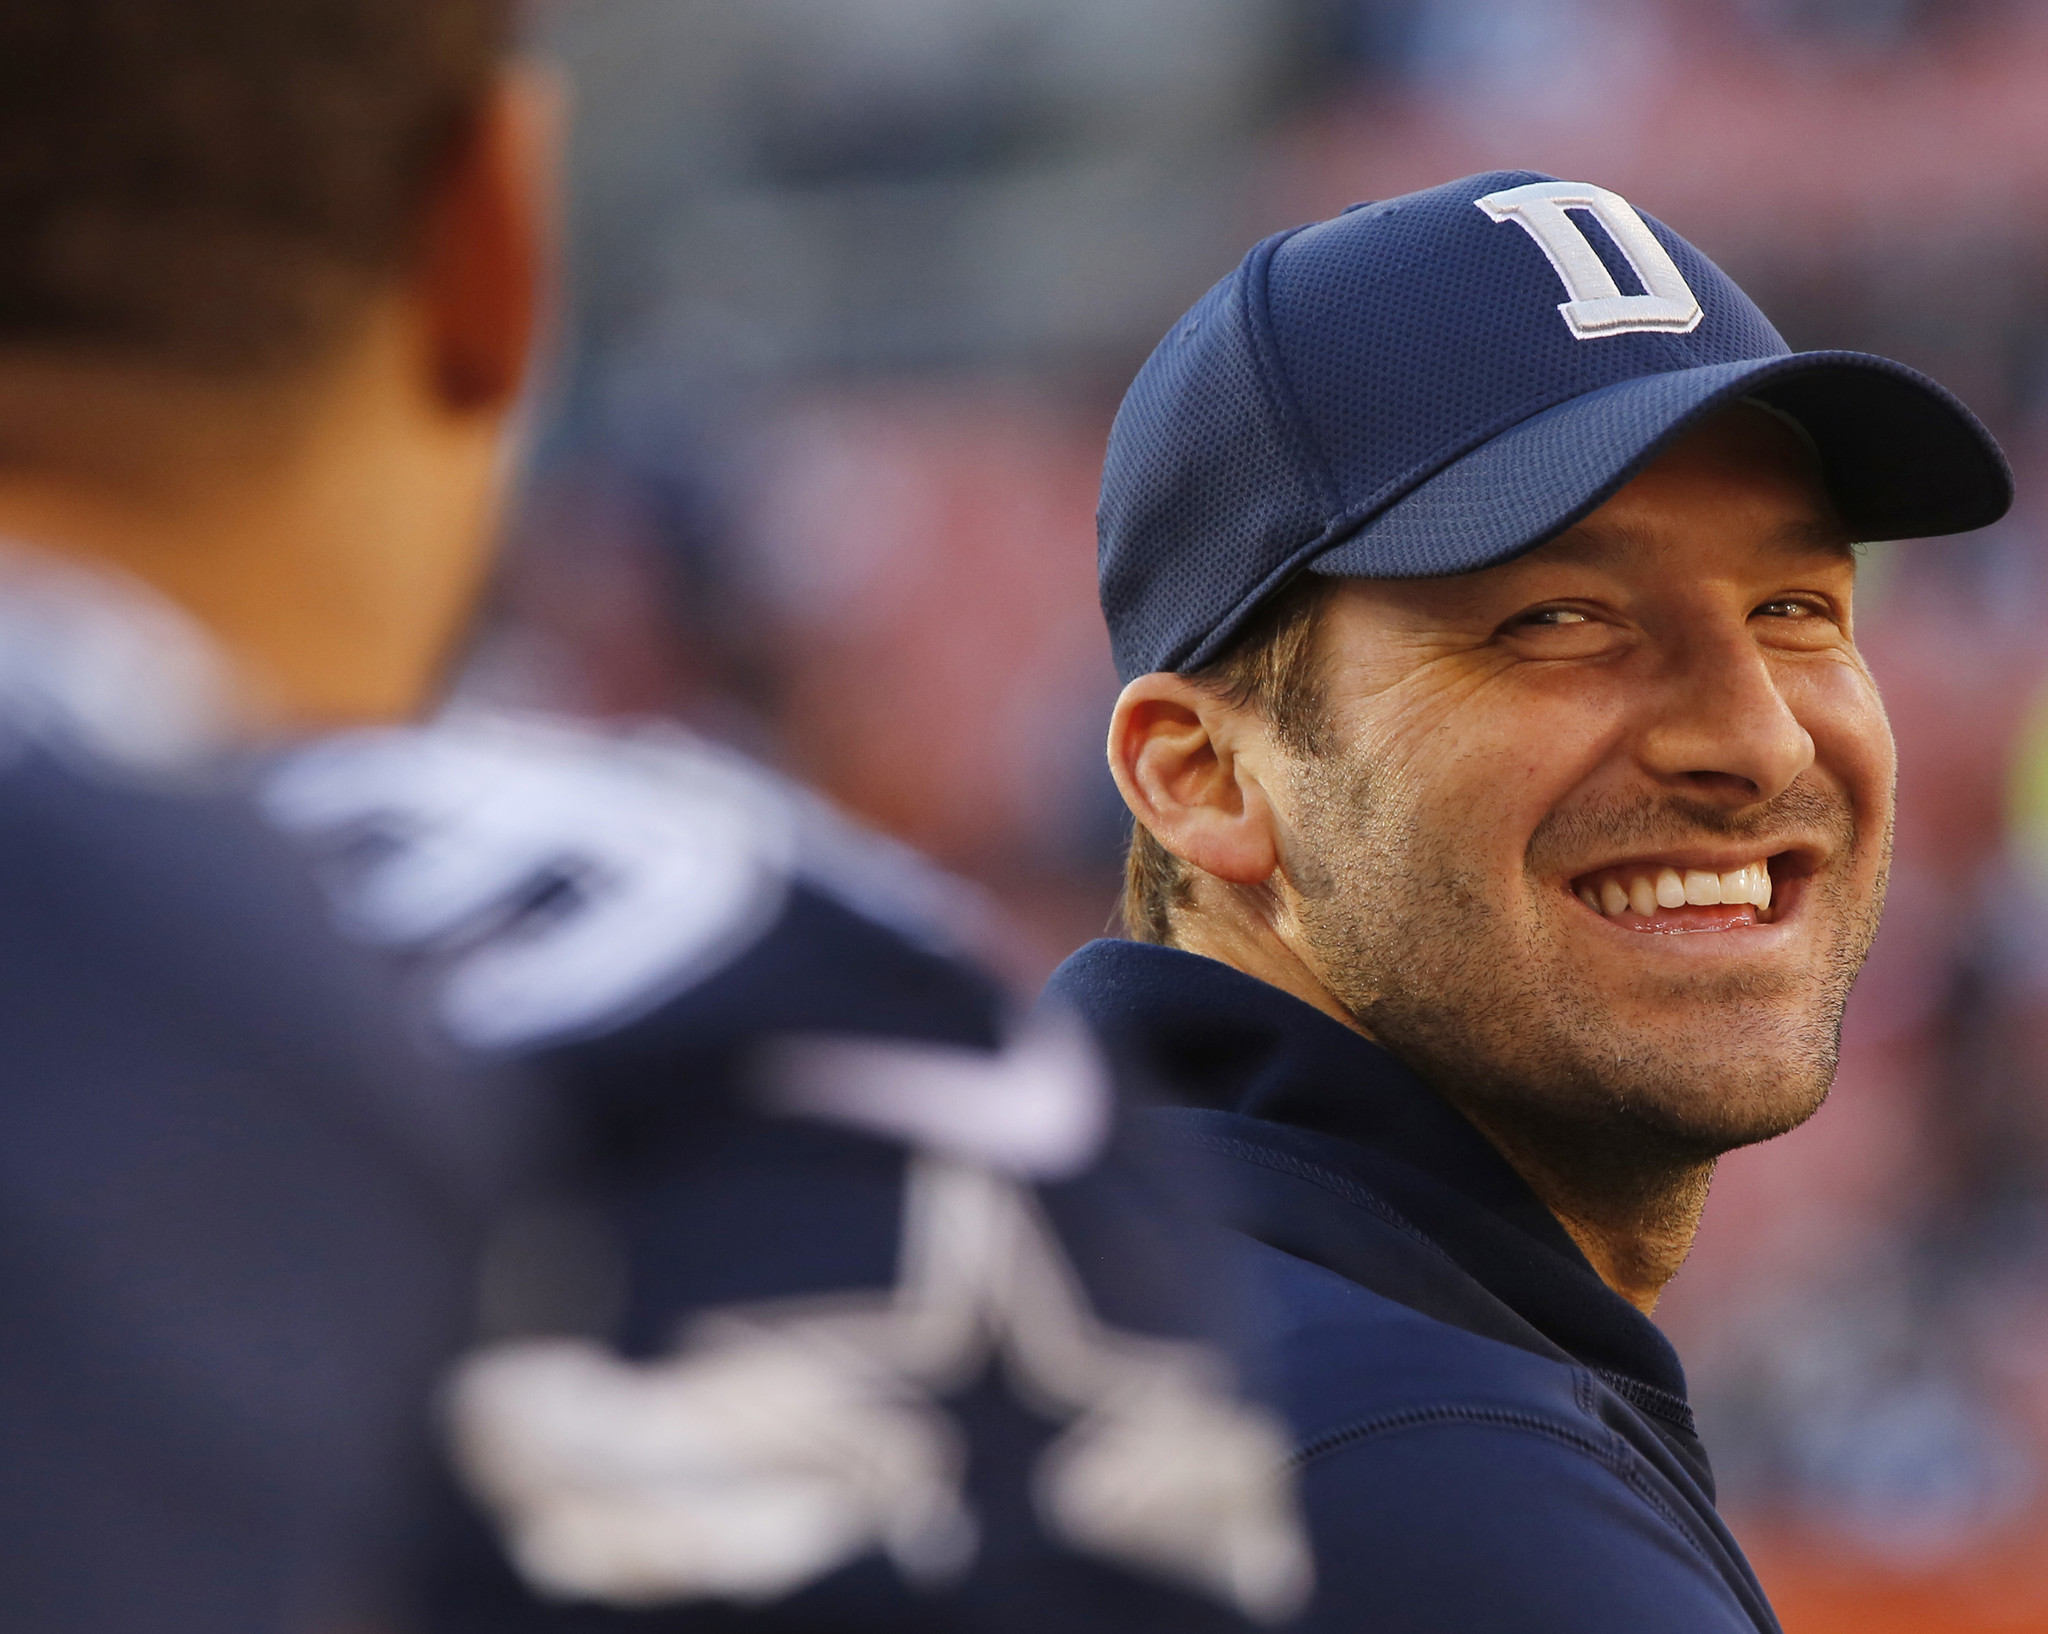 Watch Tony Romo predict plays in his broadcasting debut on CBS - Chicago Tribune